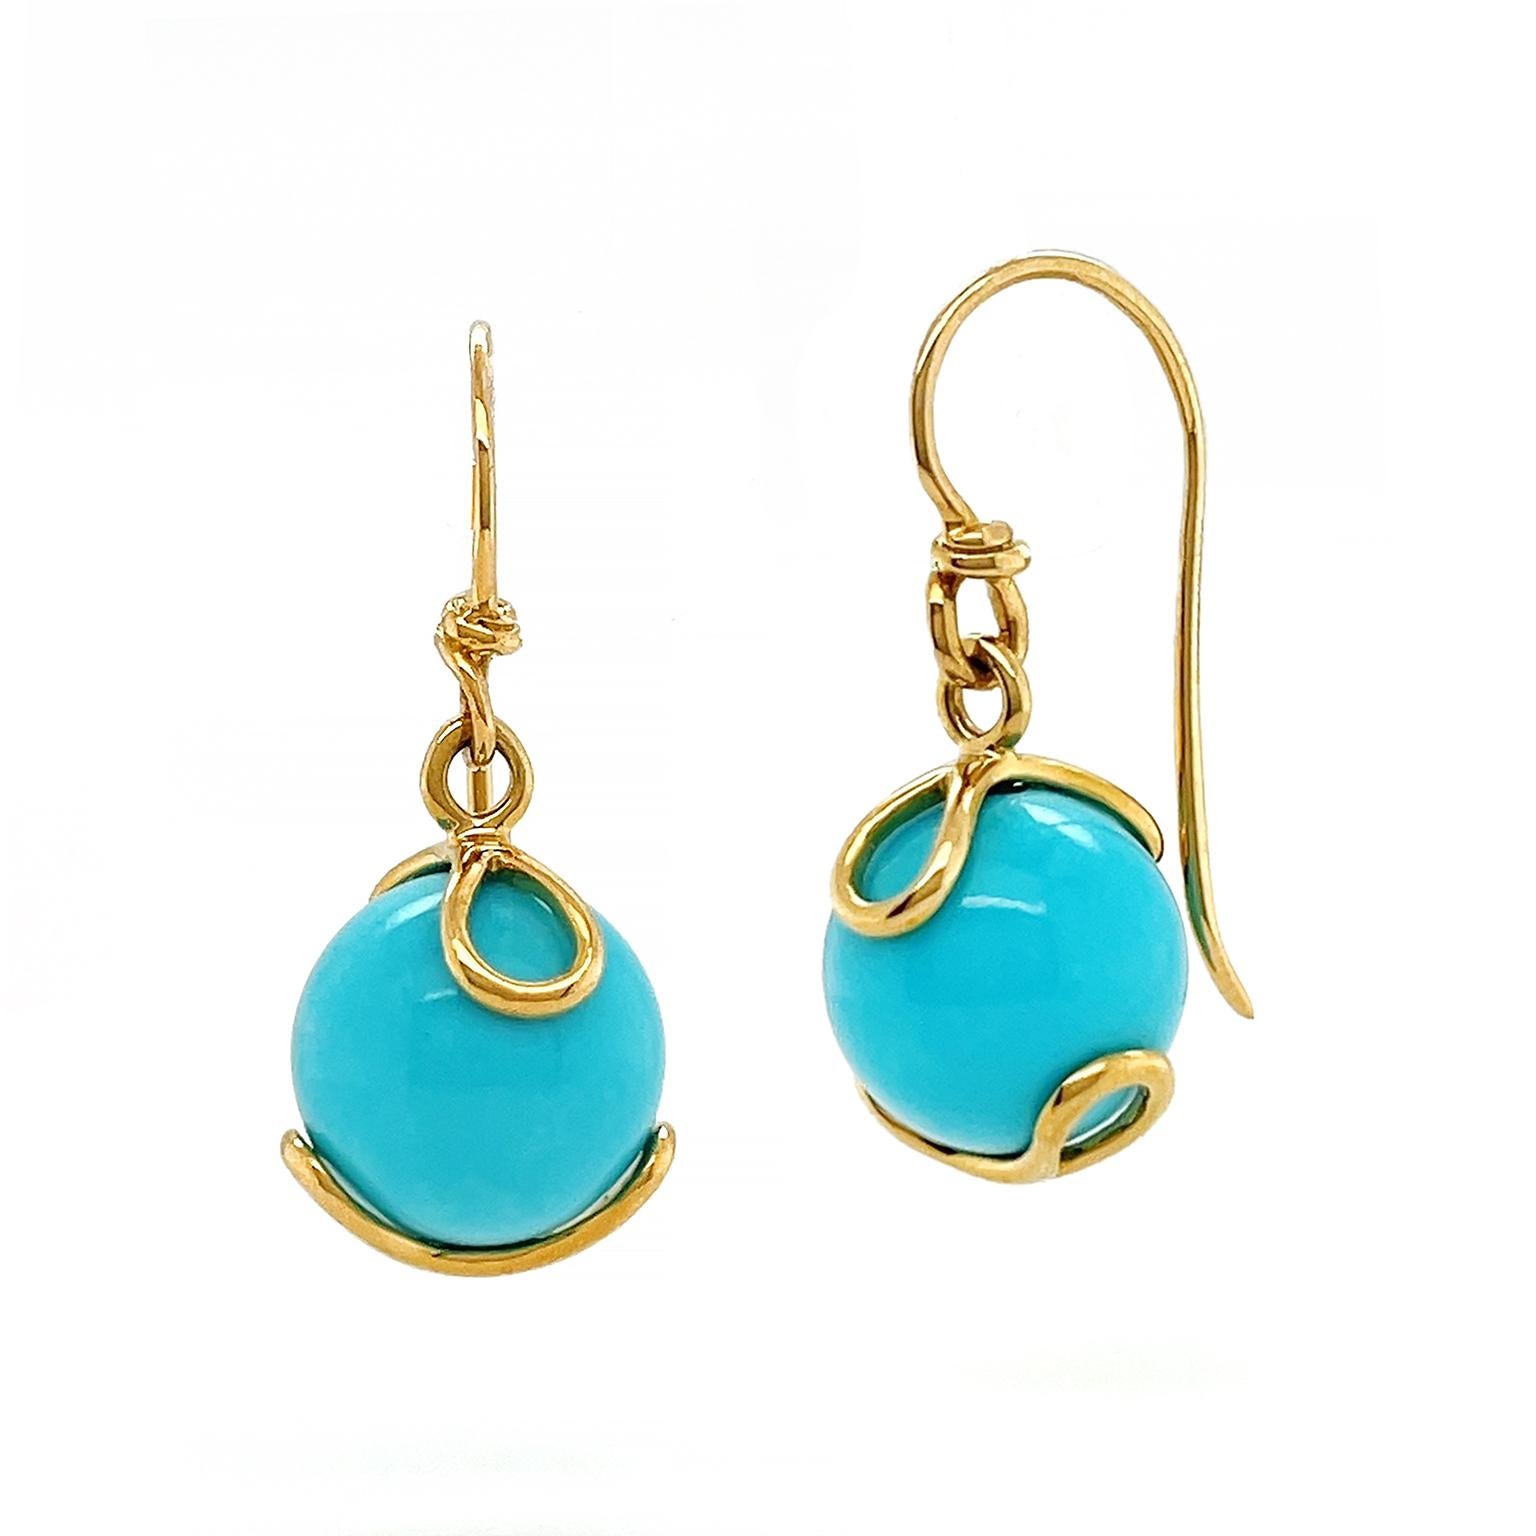 The warm shade of gold complements the cool tone of turquoise. 18k yellow gold french hooks with knotted detailing secure gold loops sheltering an orb of turquoise. The gem is polished, which further emphasizes its vivid cyan hue. The total weight